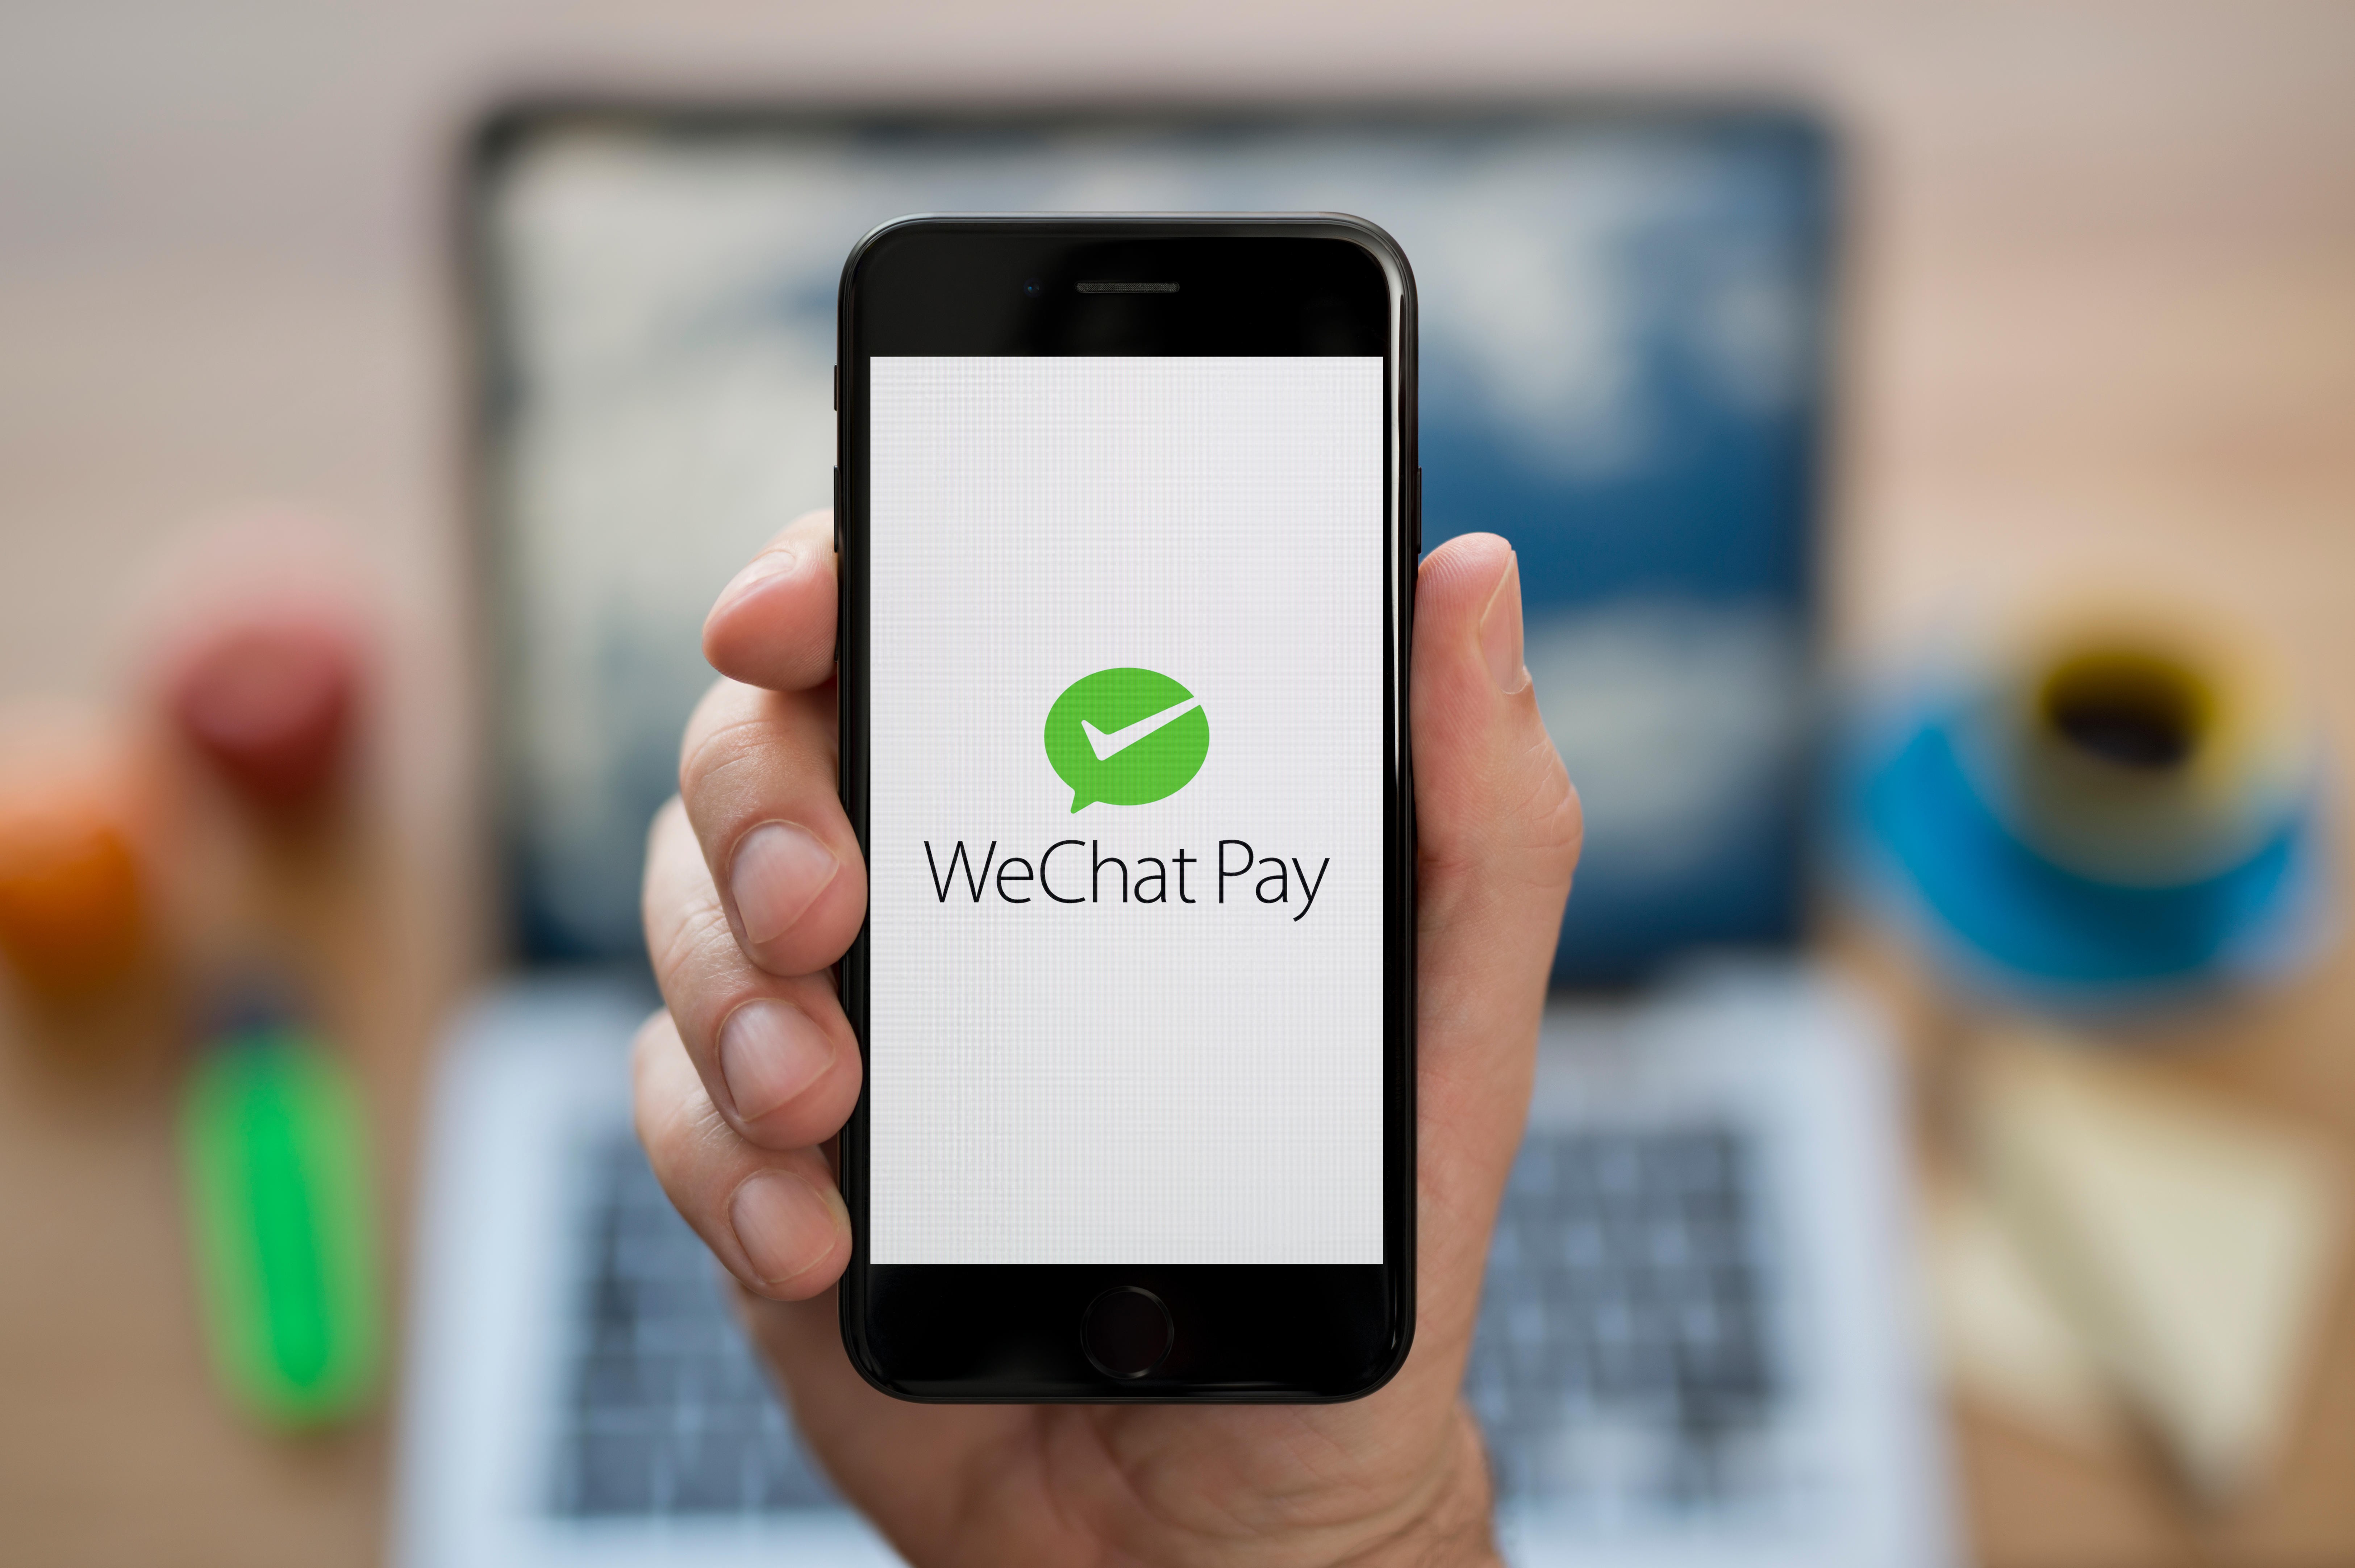 A man looks at his iPhone which displays the WeChat Pay logo, while sat at his computer desk. Photo: SCMP